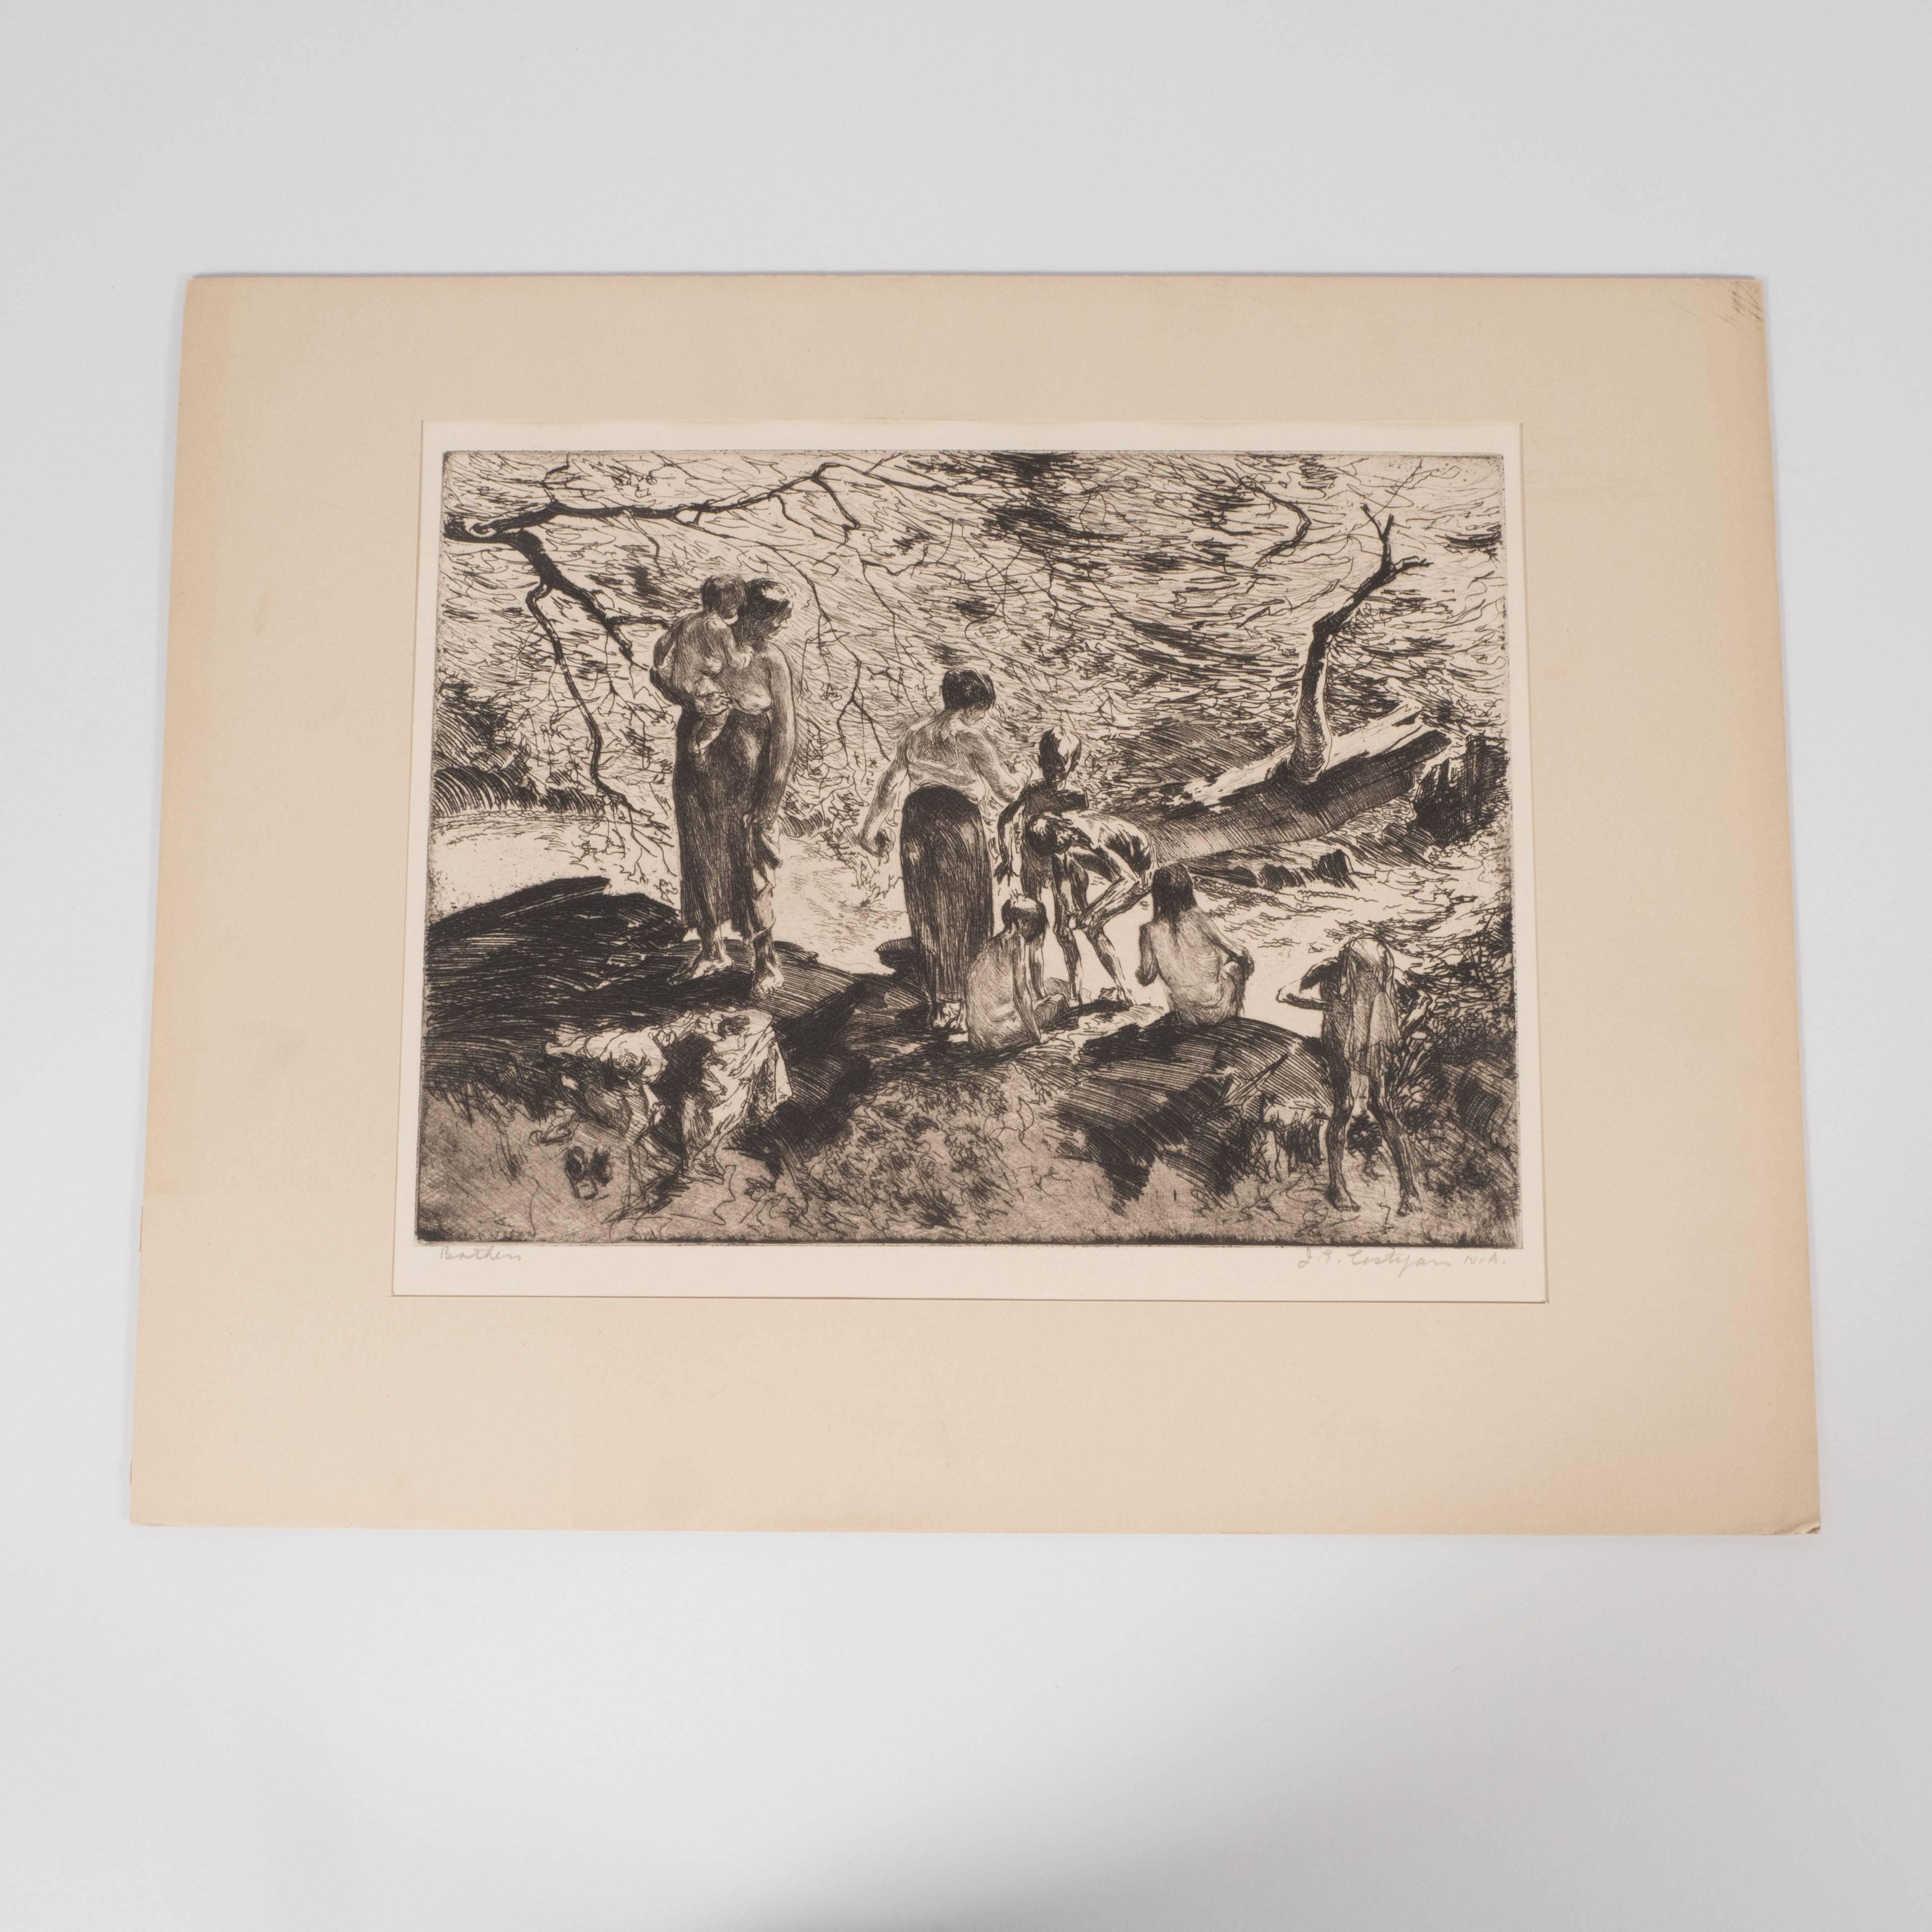 This original, limited edition etching, was realized by the esteemed American artist John E. Costigan, circa 1930. He is represented in the collections of the Metropolitan Museum, the Philips Memorial Gallery in Washington and the Brooklyn Museum,